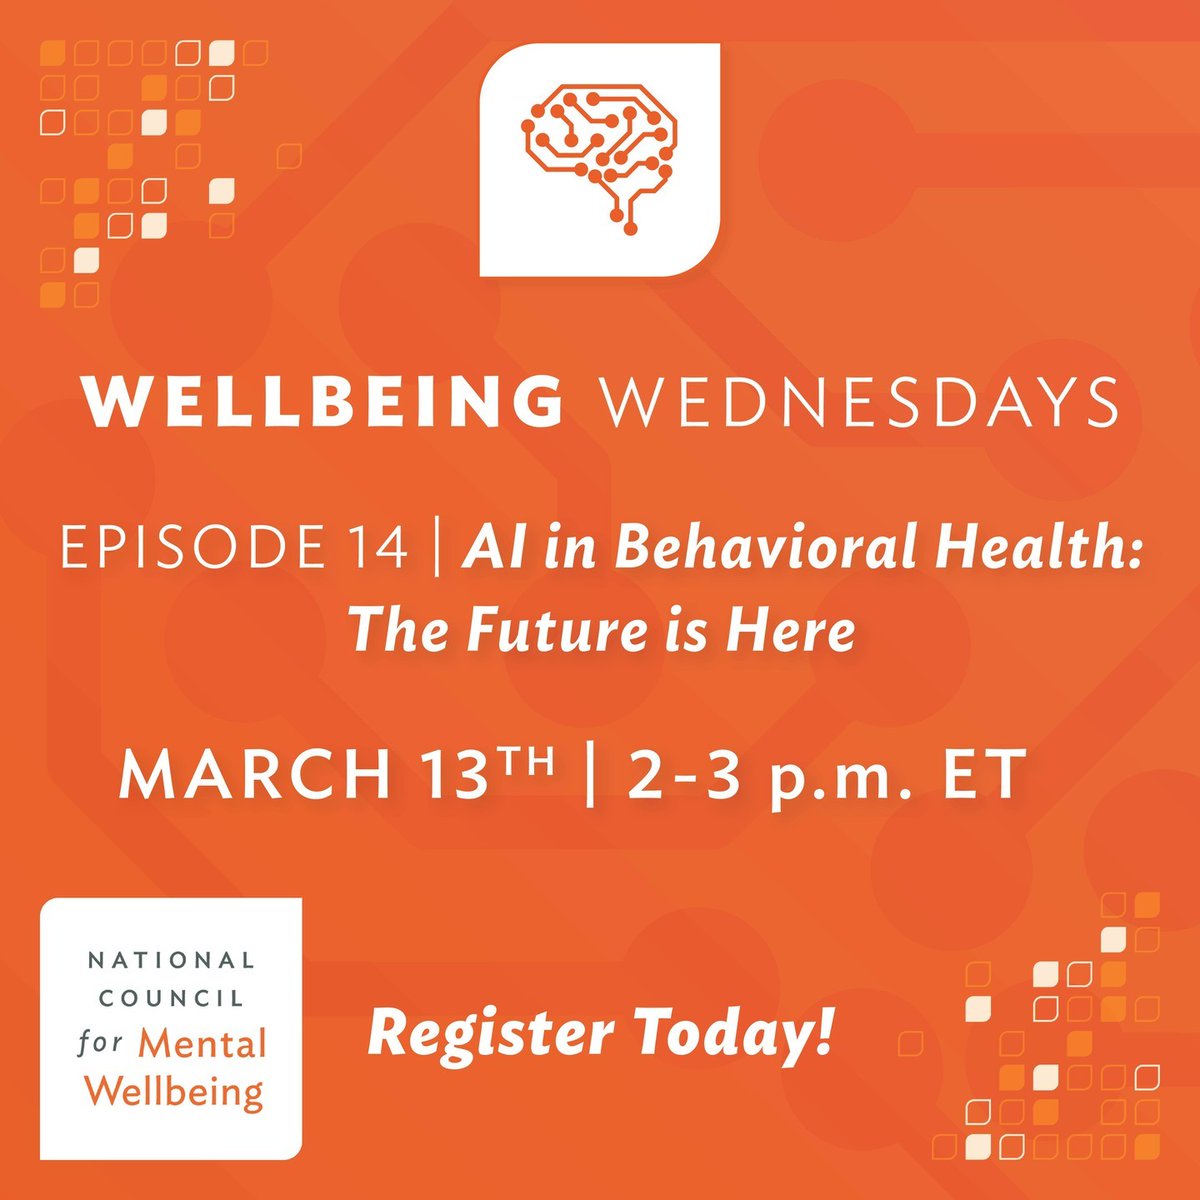 How is #AI being used in behavioral health care & to what degree can it augment the important work we do? At our latest #WellbeingWednesdays episode, we'll demystify AI & explore its potential in the delivery of #mentalhealth and #substanceusecare: bit.ly/3wJ9d8W